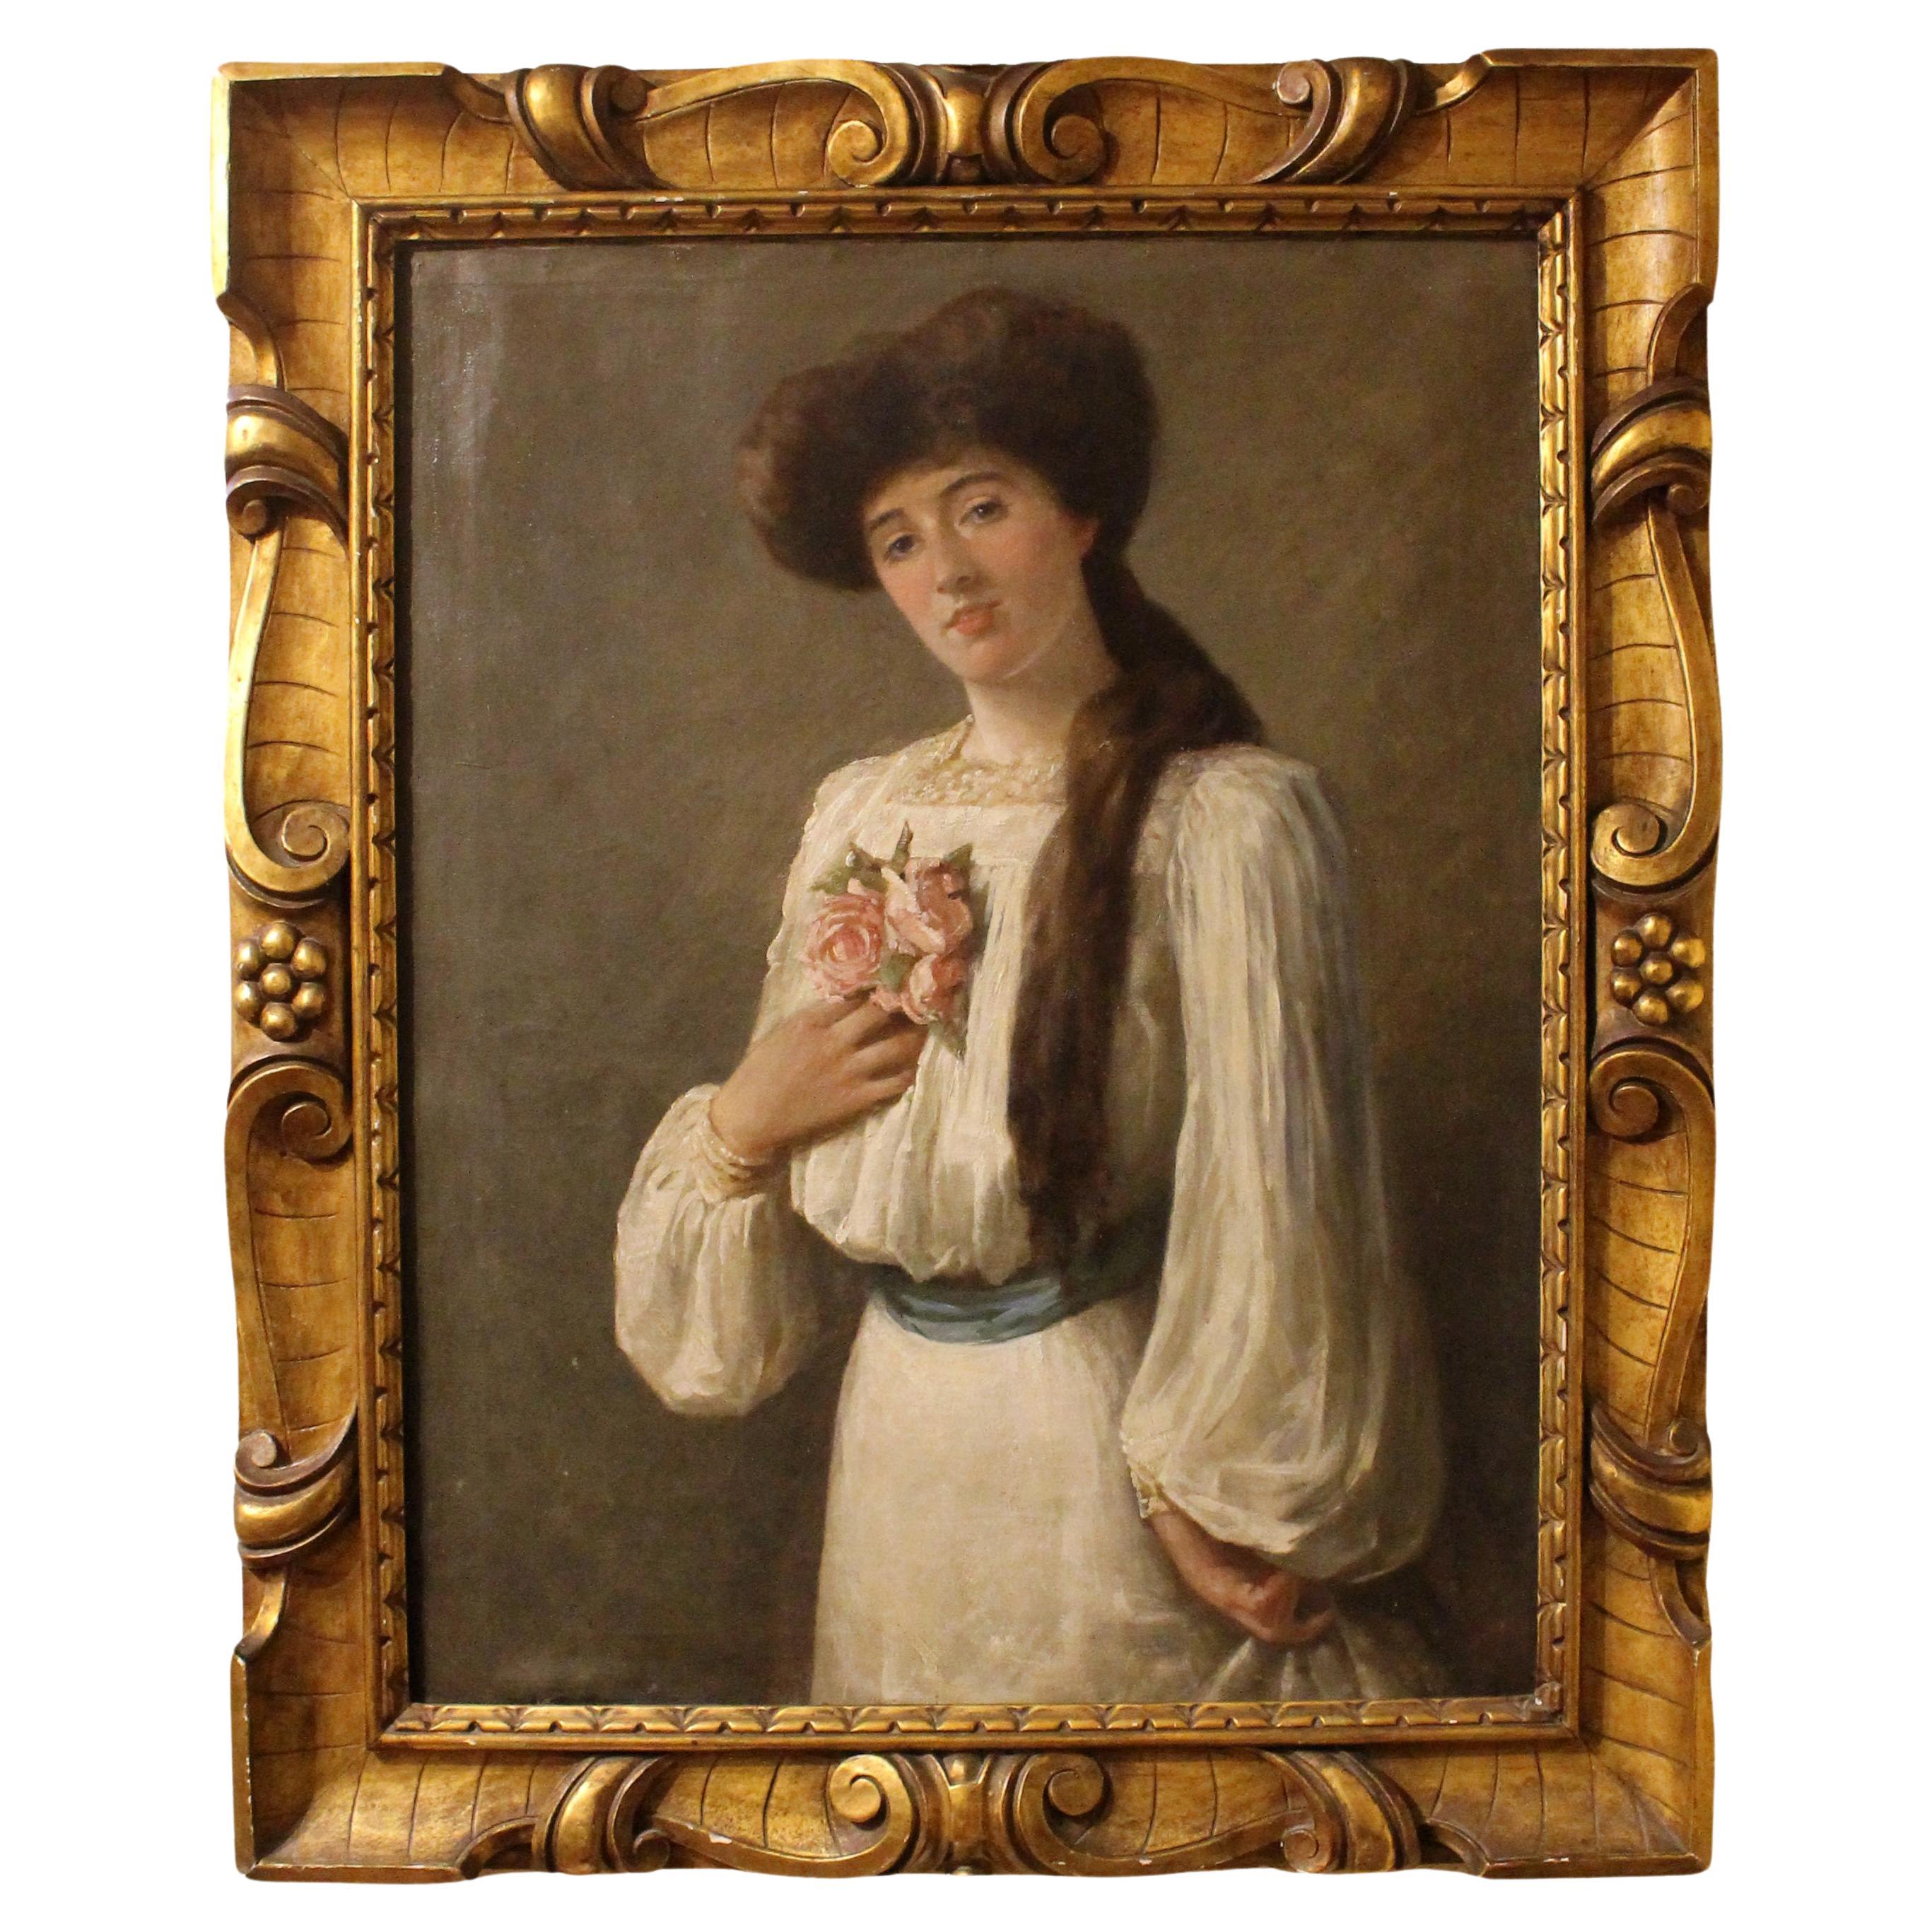 Turn of the 20th century Painting of a Young Woman, American